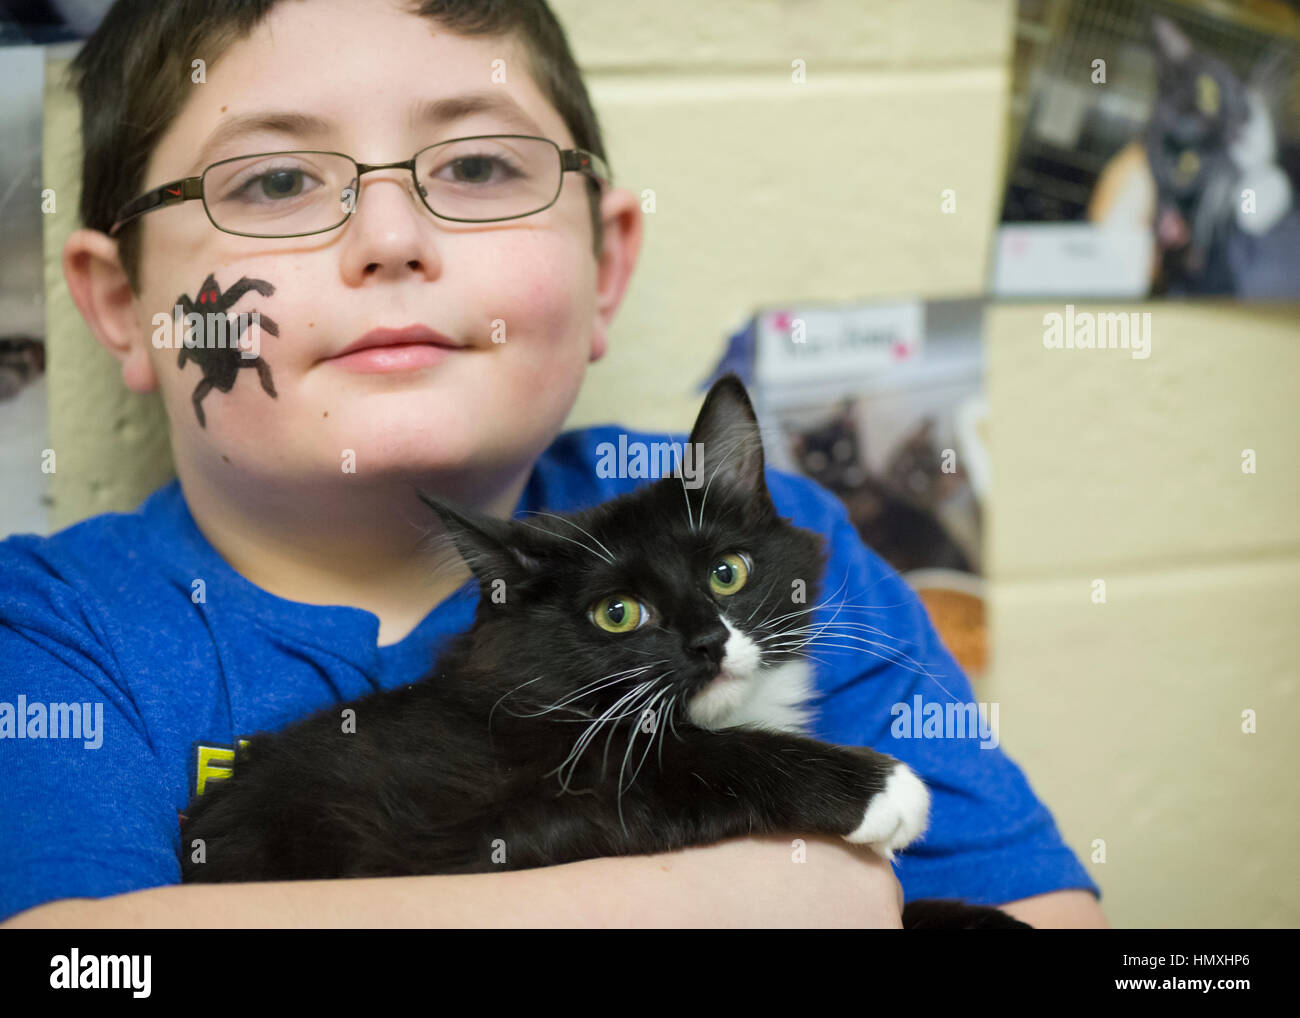 Wantagh, New York, USA. February 5, 2017.  AYDIN SHAH, 8 1/2,, of Merrick is holding SALSA, a 5 1/2 month old female kitten available for adoption at Last Hope Animal Rescue's Open House during Hallmark Channel's Kitten Bowl IV. Aydin had a black spider painted on his face during the party. Kittens in Last Hope Lions team played against kittens in North Shore Bengals team. Last Hope kittens have been part of each Kitten Bowl, whose purpose is to promote cat and kitten adoptions. Credit: Ann E Parry/Alamy Live News Stock Photo